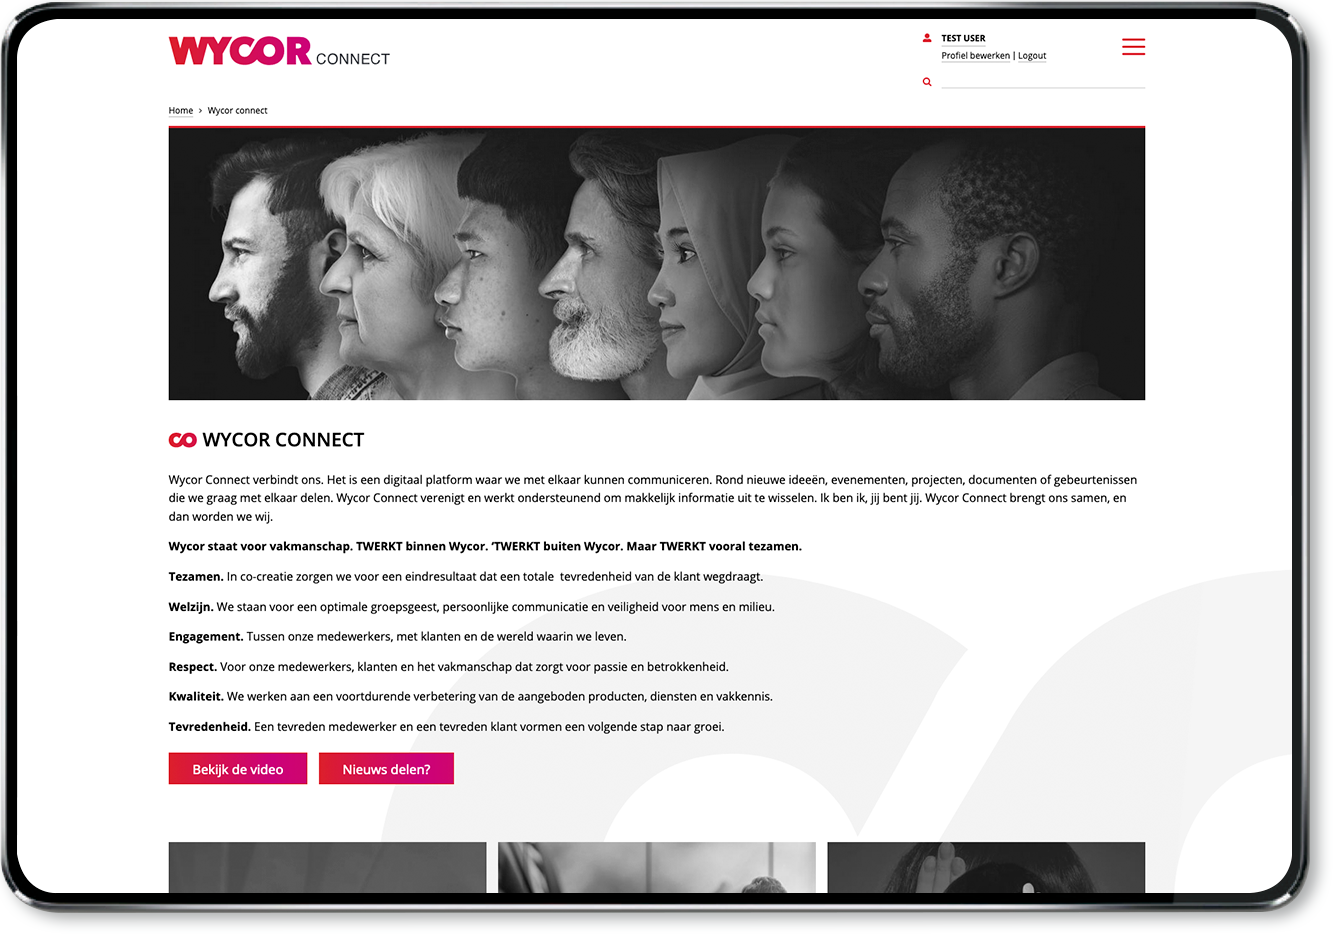 Wycor connect